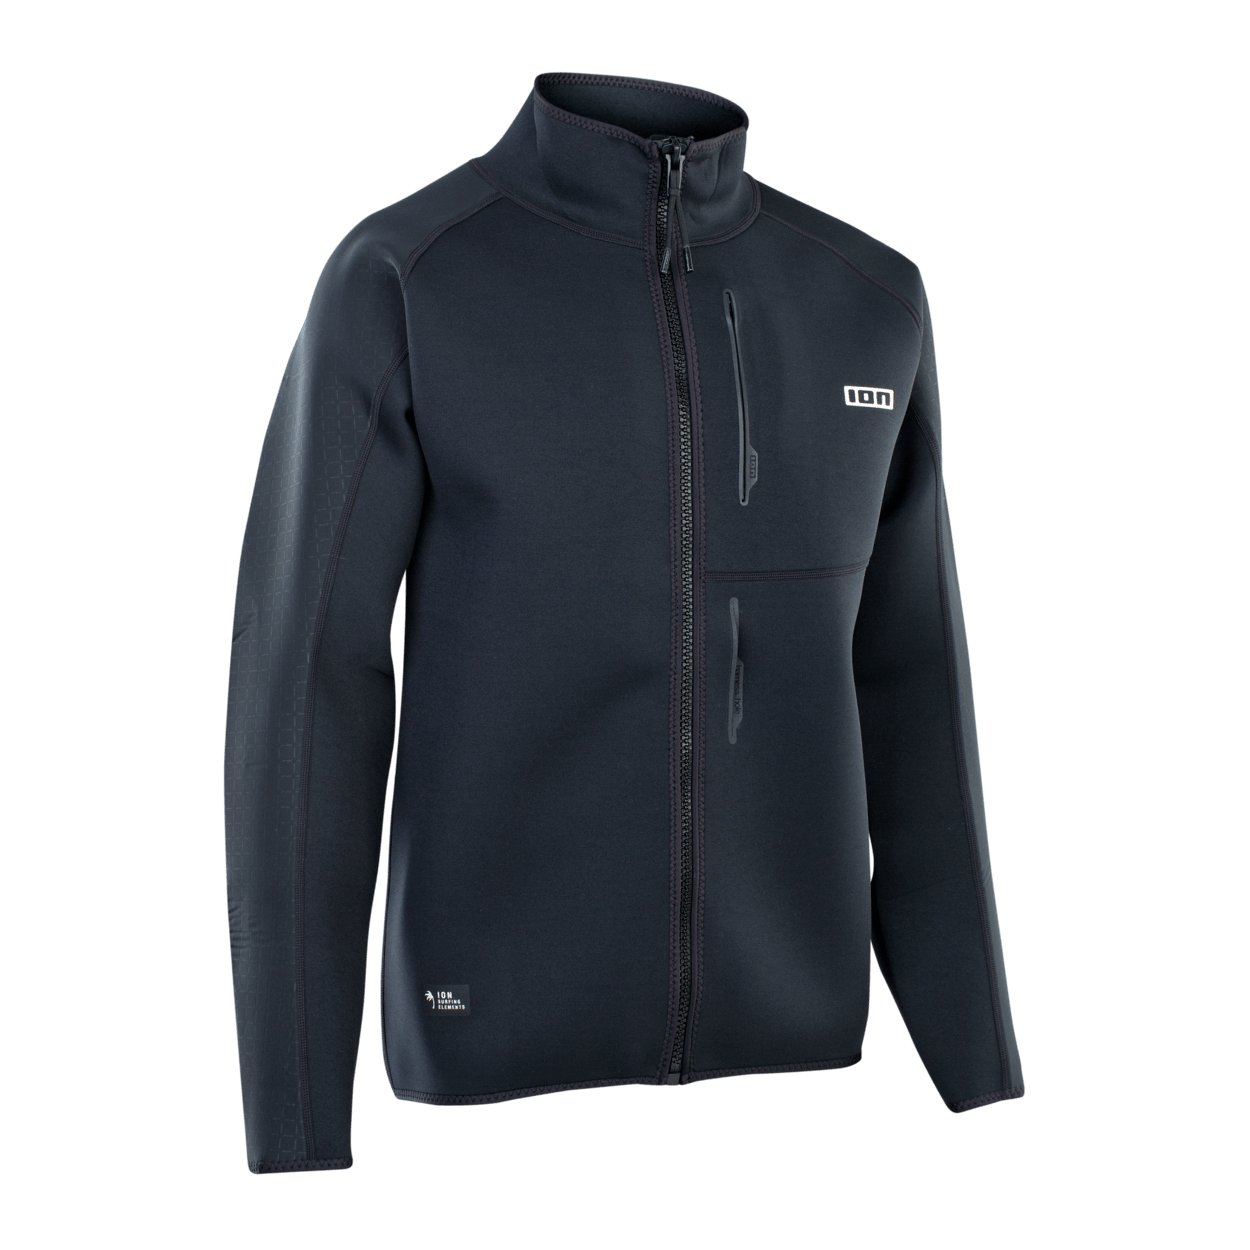 ION Neo Cruise Jacket men 2022 - Worthing Watersports - 9010583052830 - Tops - ION Water